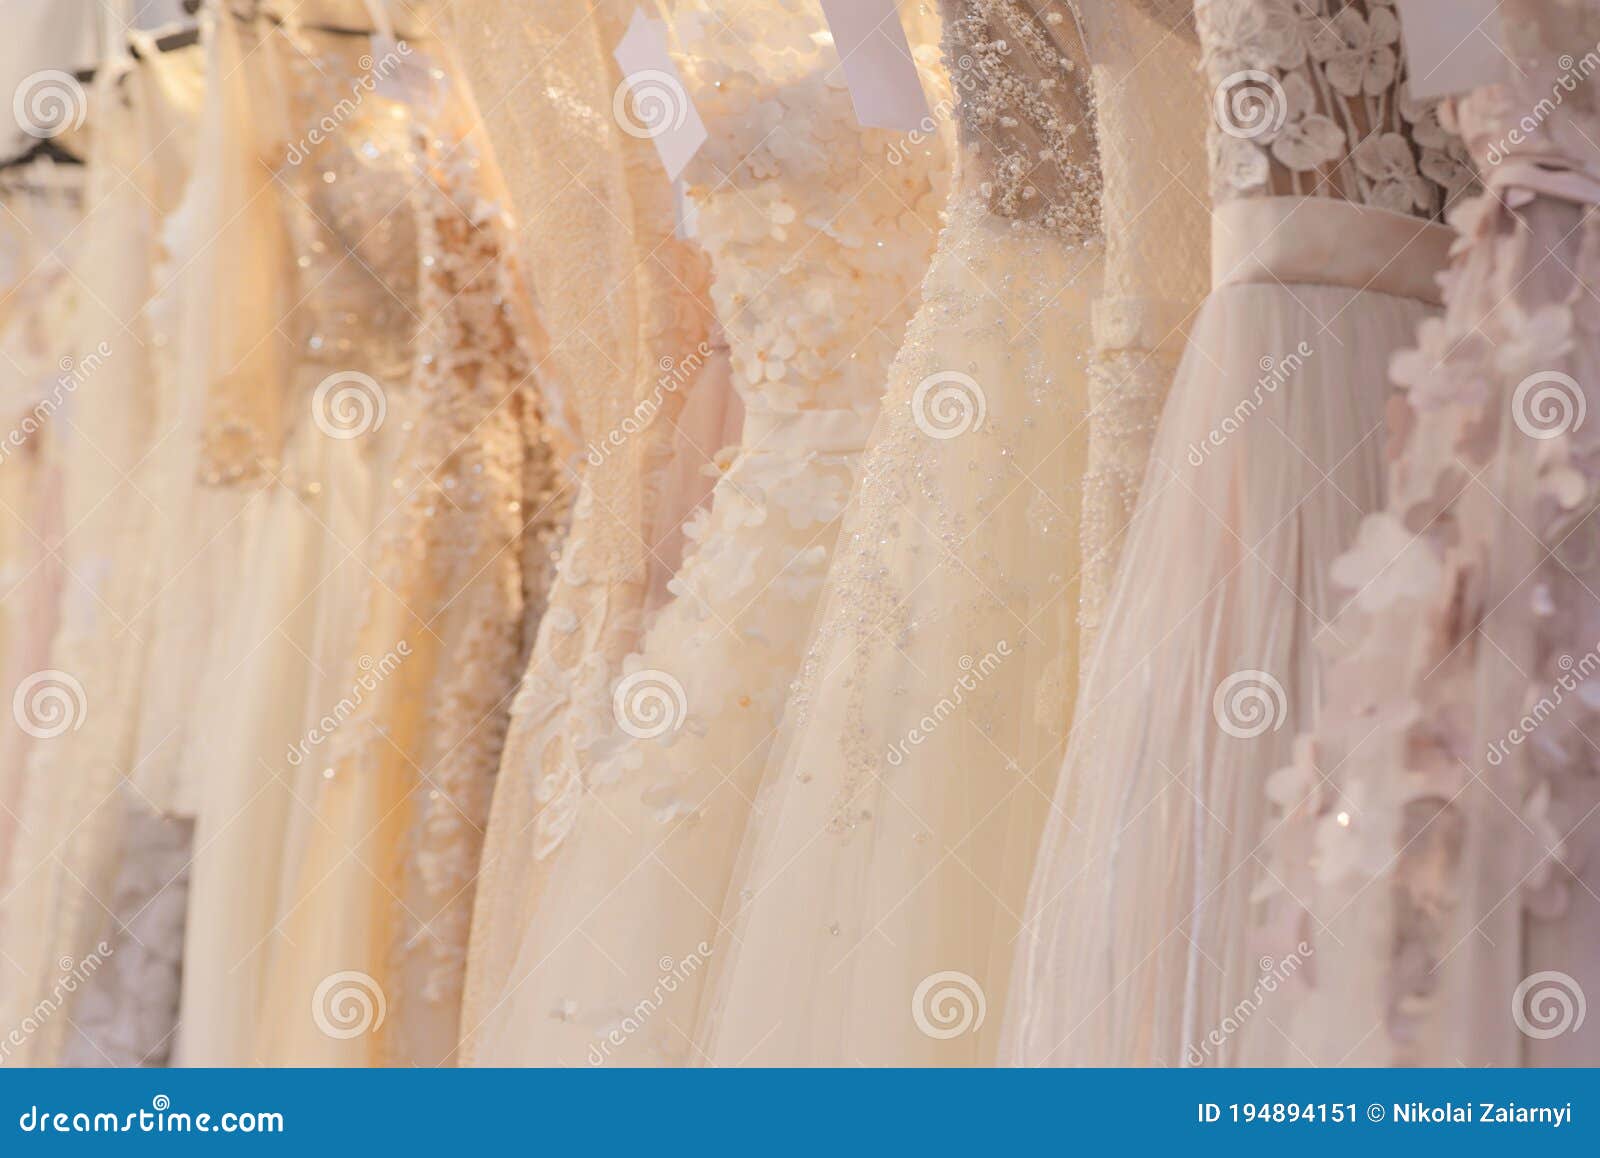 wedding dresses hang on a hanger in a row